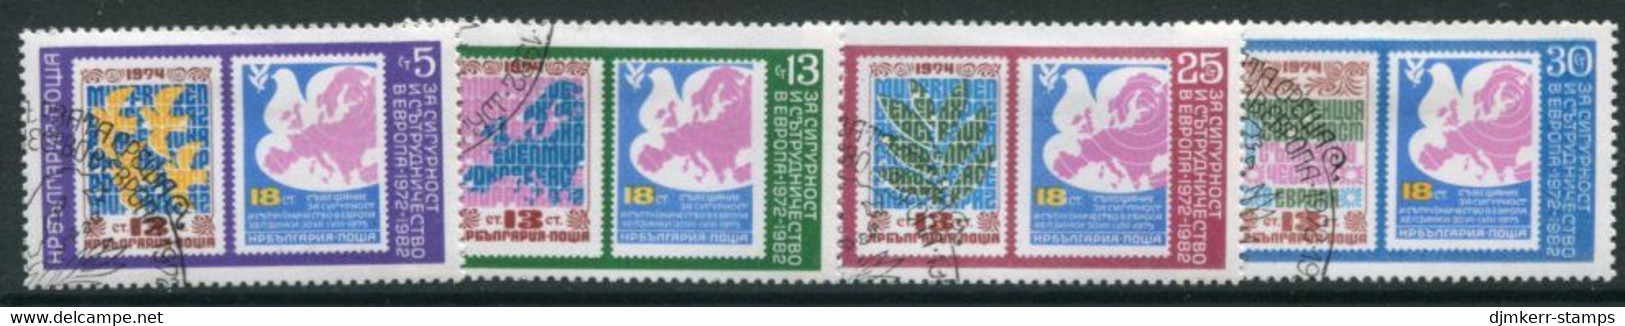 BULGARIA 1982 European Security Conference Used.  Michel 3119-22 - Gebraucht